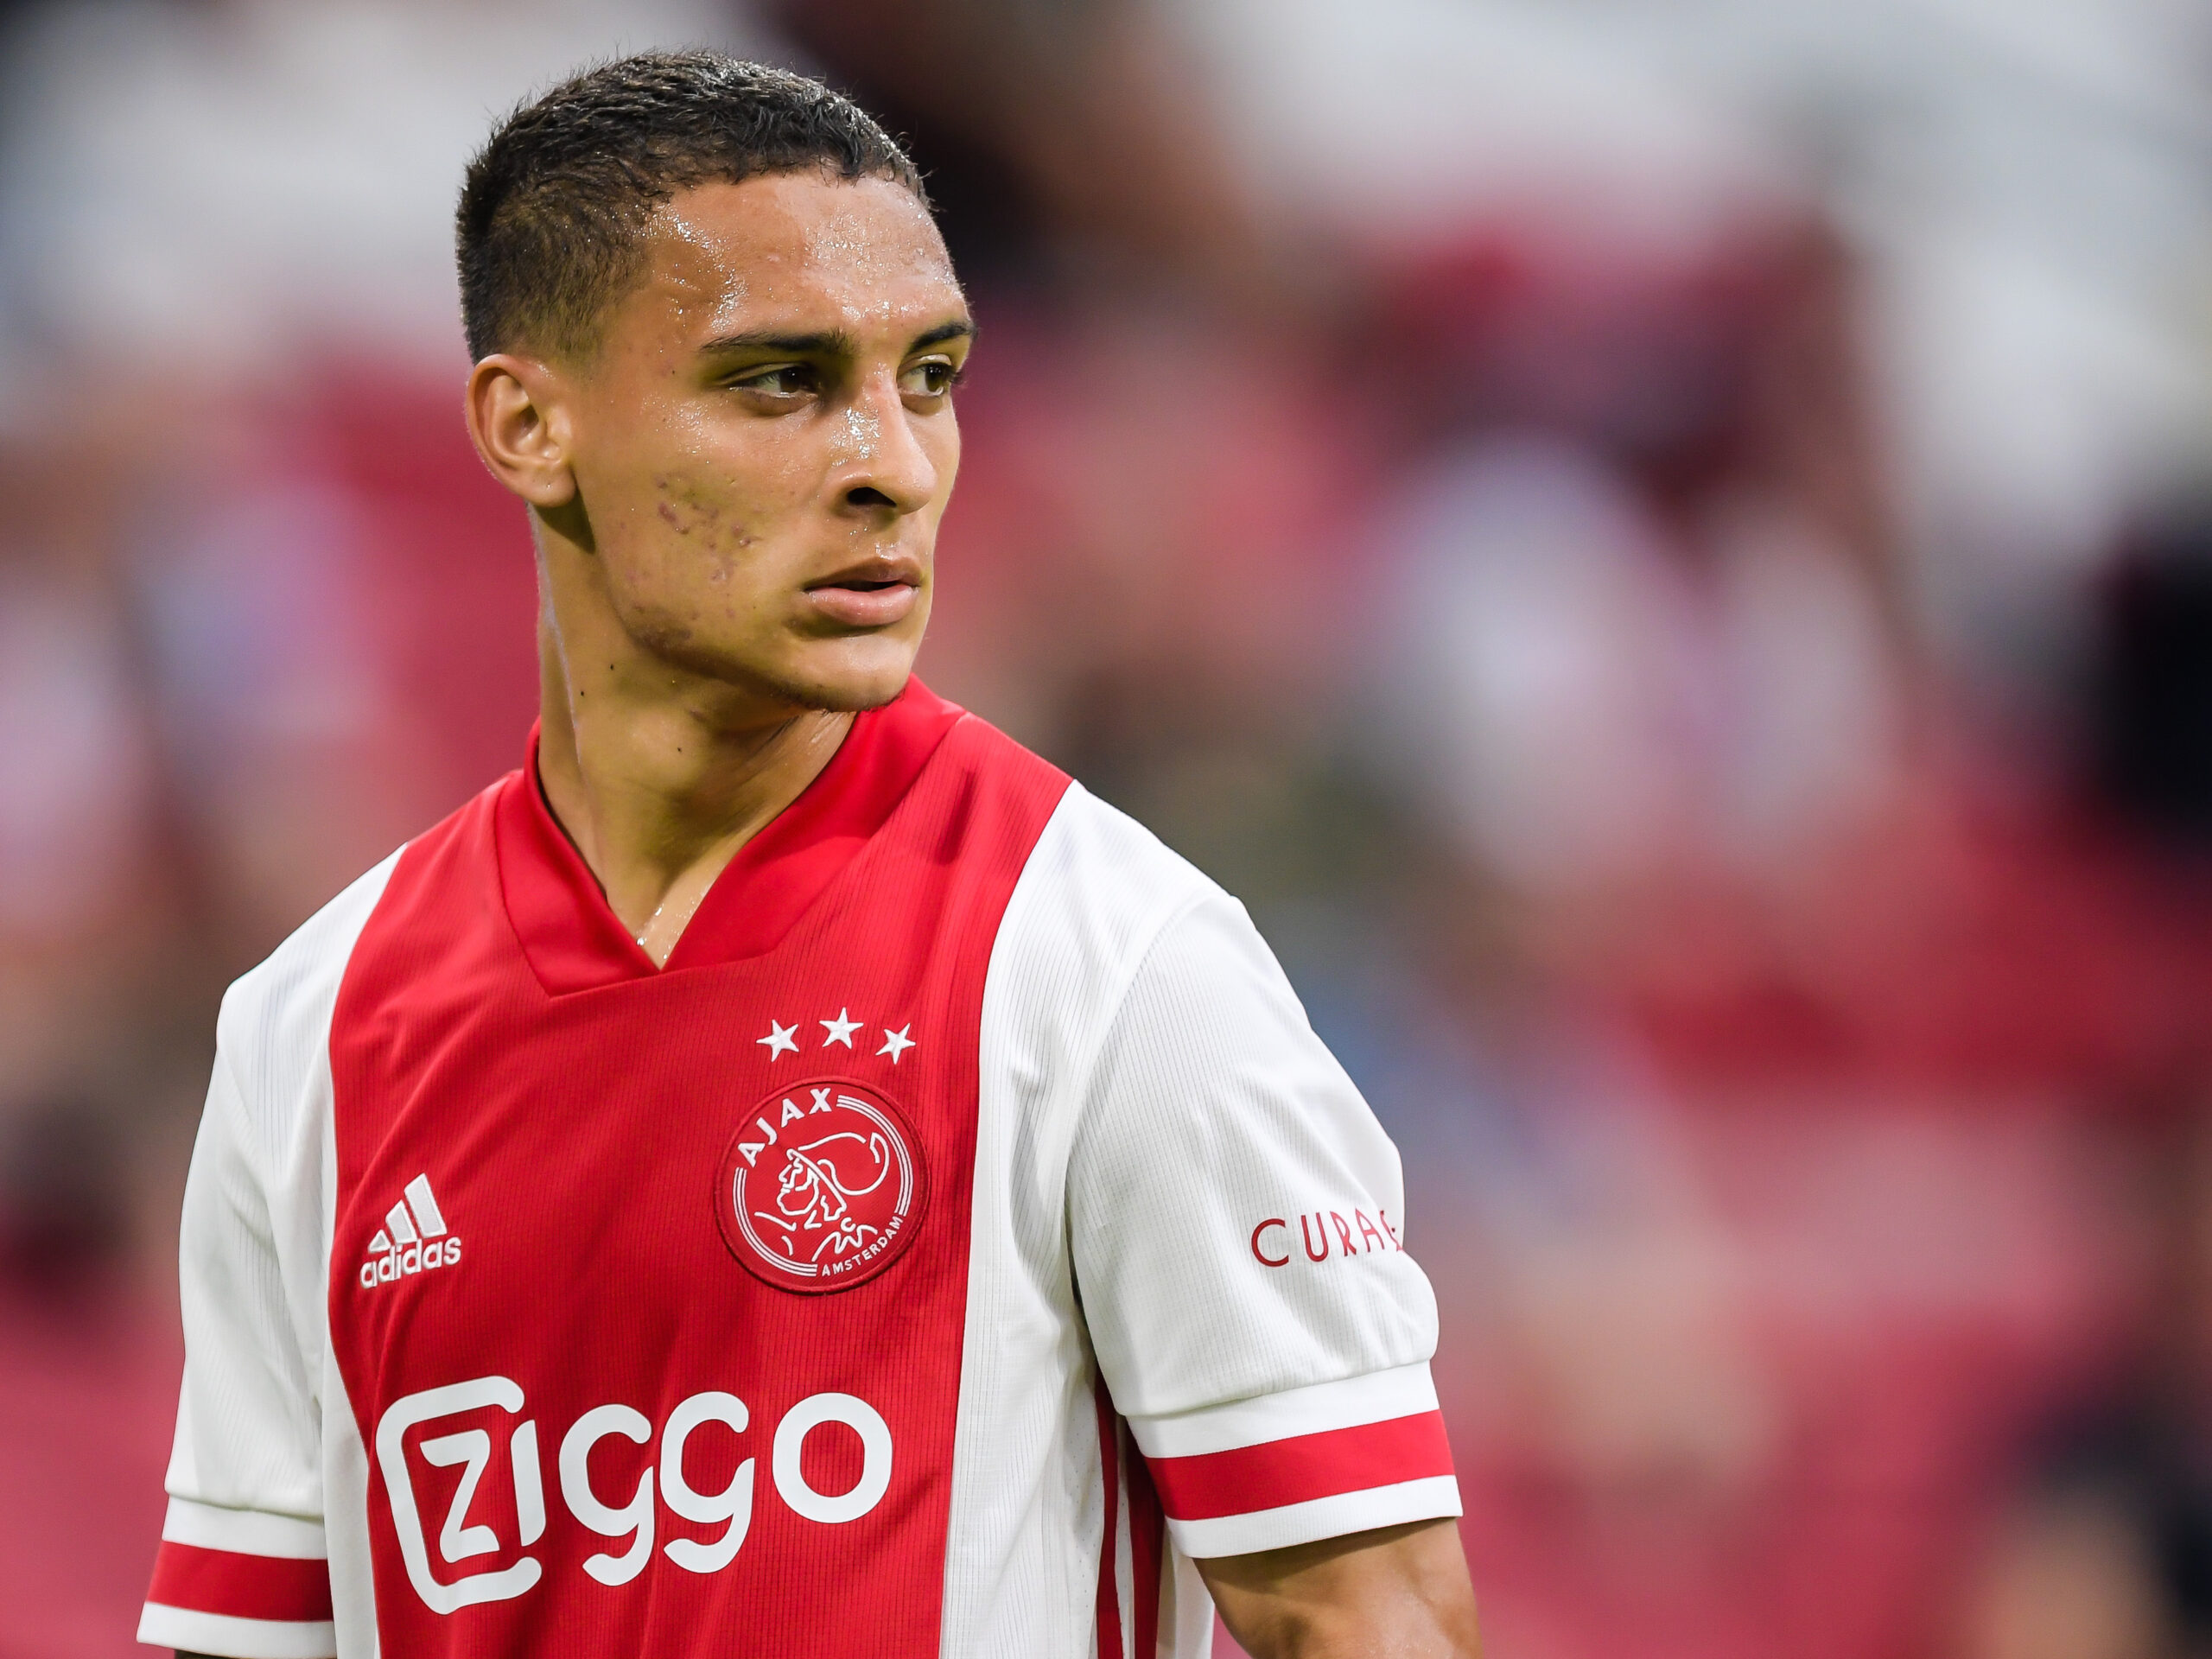 Chelsea establish contact with Ajax star and Manchester United target Antony.